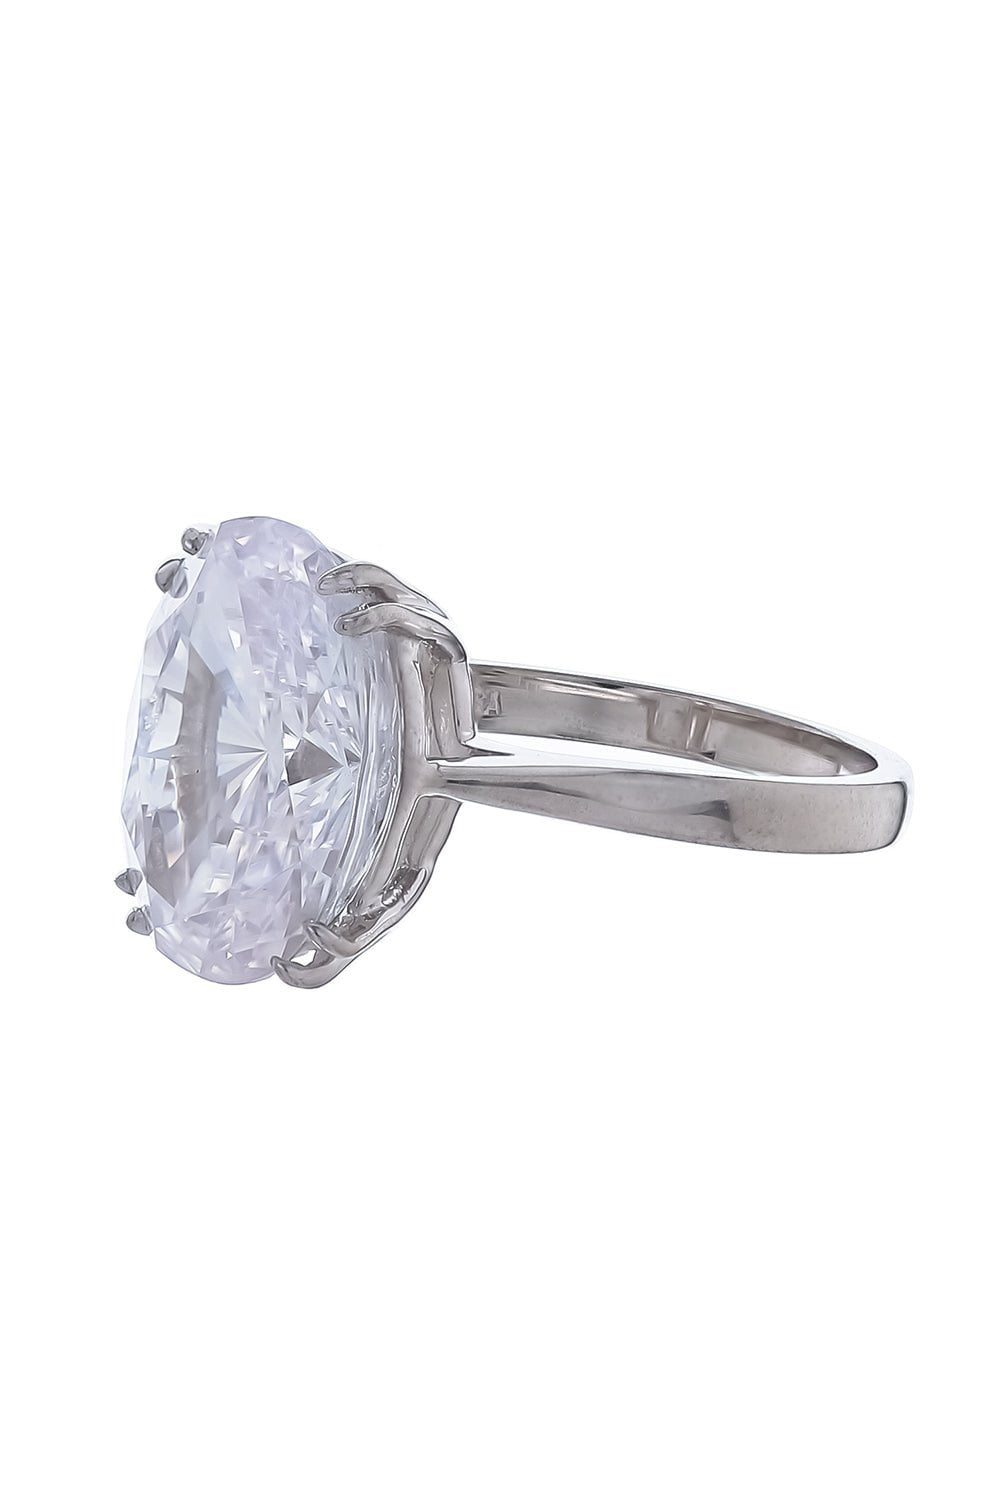 FANTASIA by DESERIO-Oval Solitaire Ring-WHITE